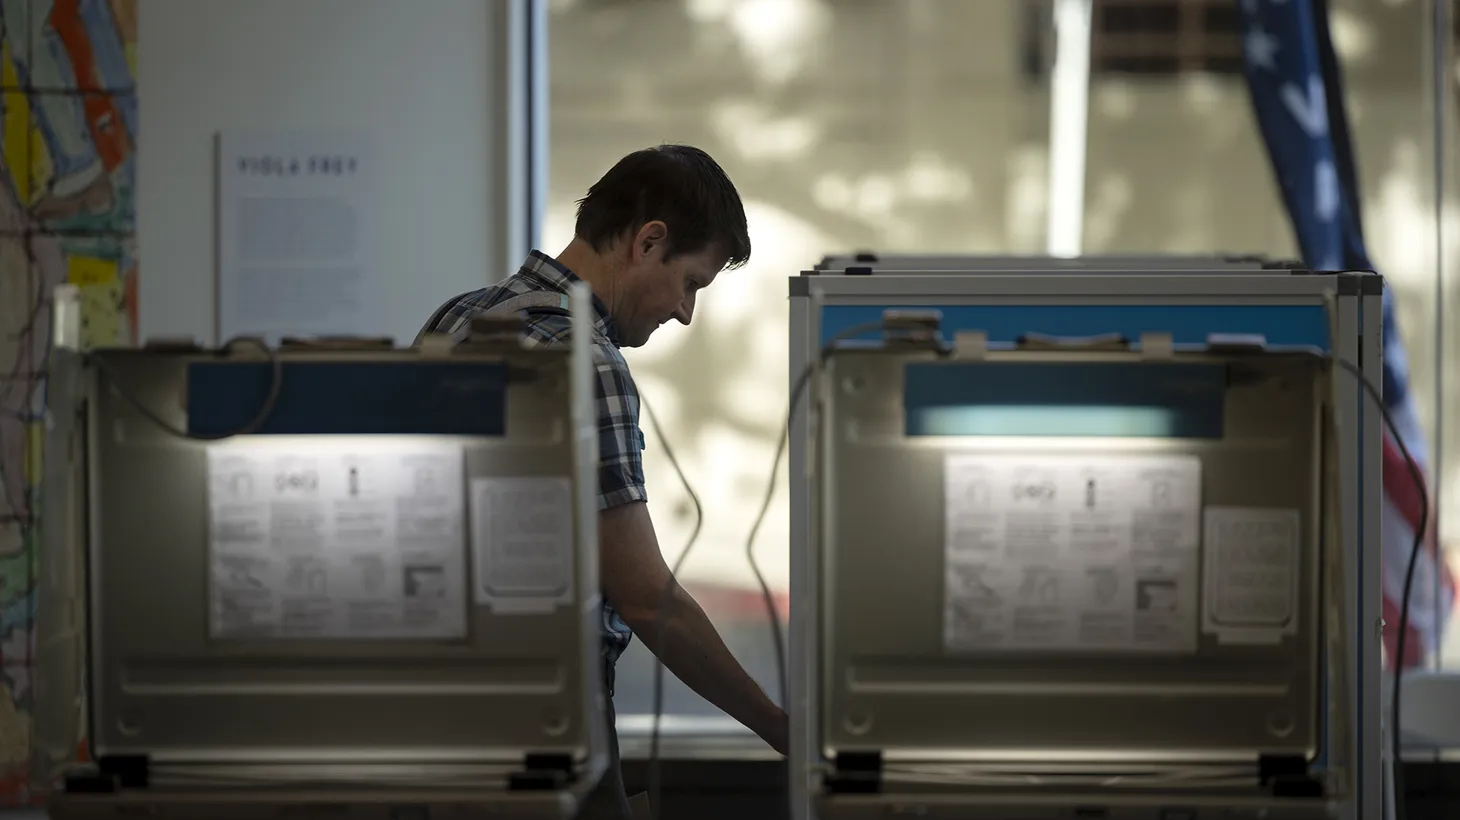 A voter casts their ballot at a voting site at the California Museum in downtown Sacramento on June 7, 2022.